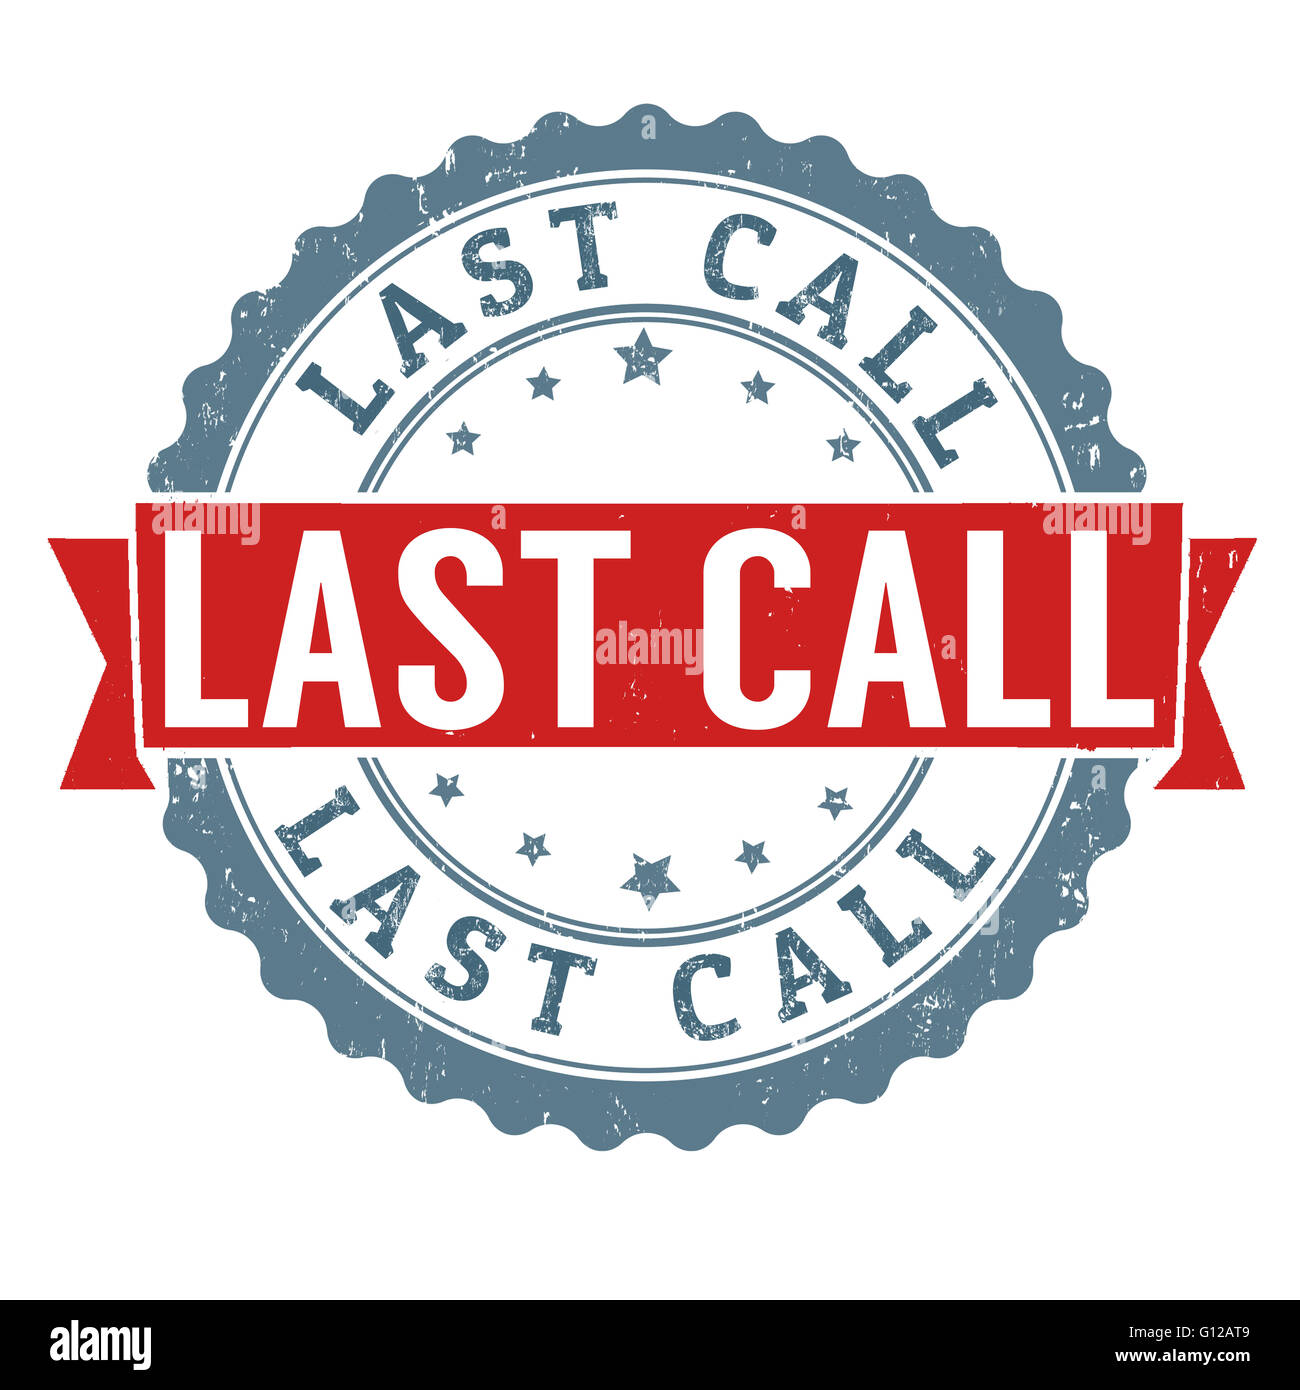 Last call grunge rubber stamp on white background, vector illustration Stock Photo